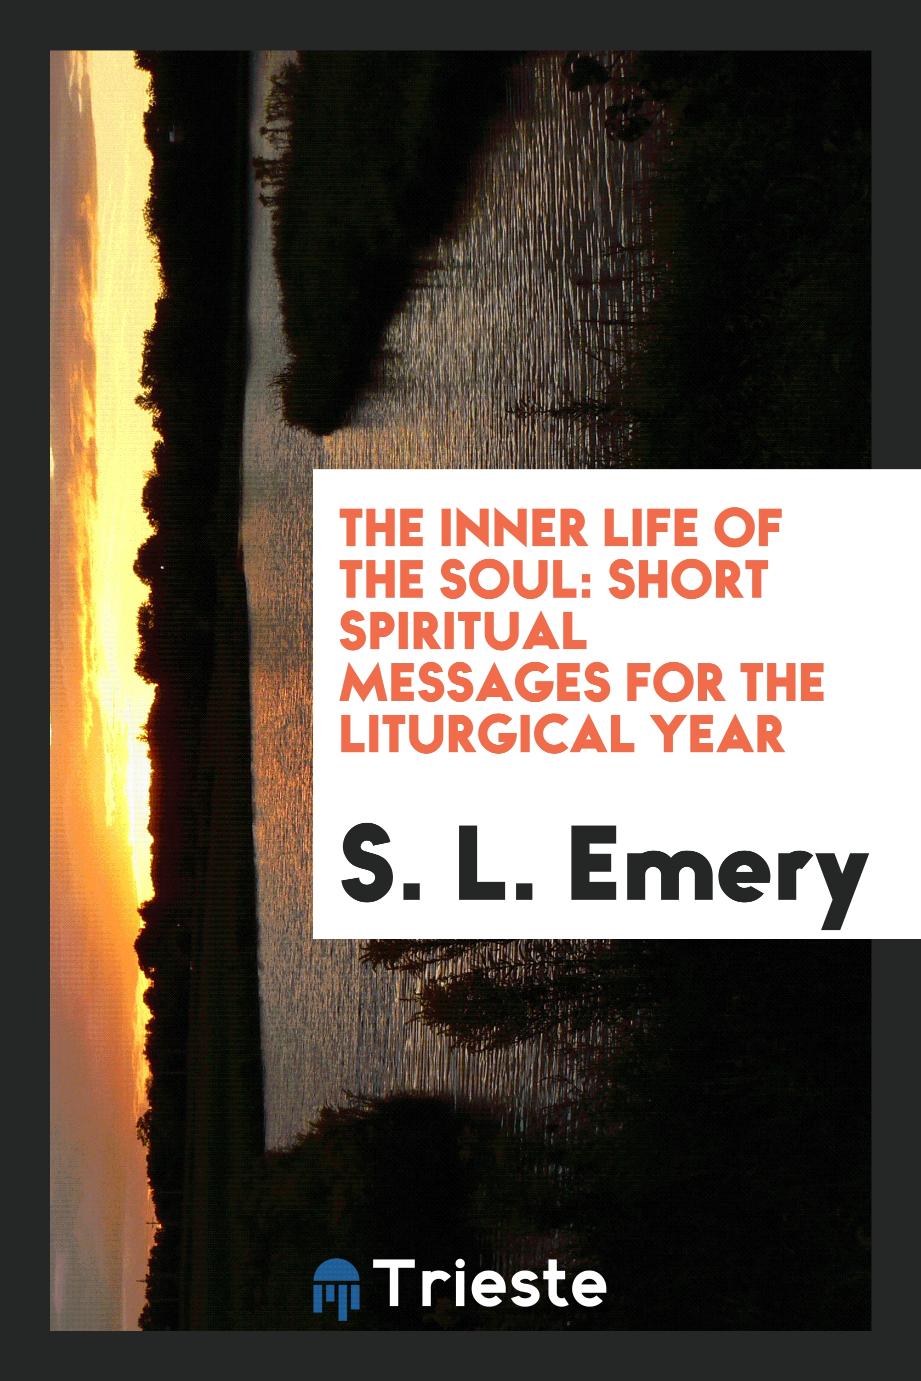 The inner life of the soul: short spiritual messages for the liturgical year